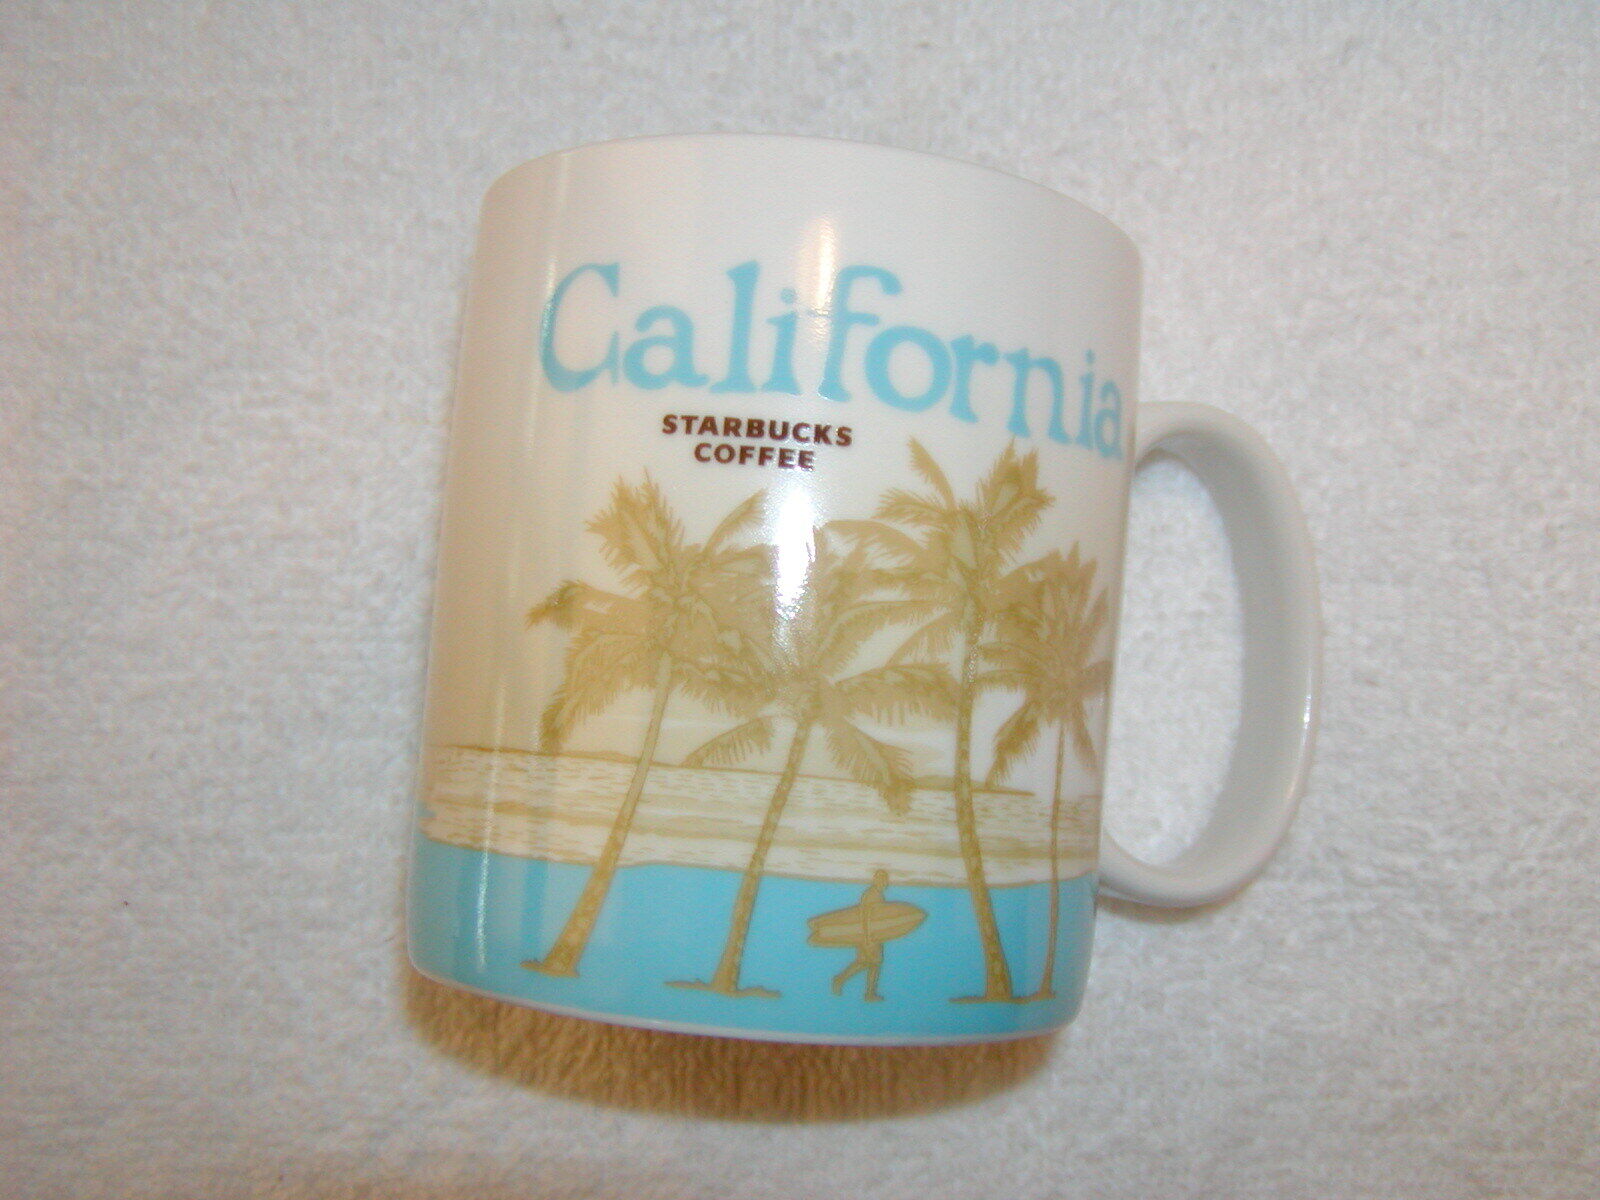 2009 - 2012 Starbucks Collector Series Mug - California - NEW IN BOX WITH TAGS